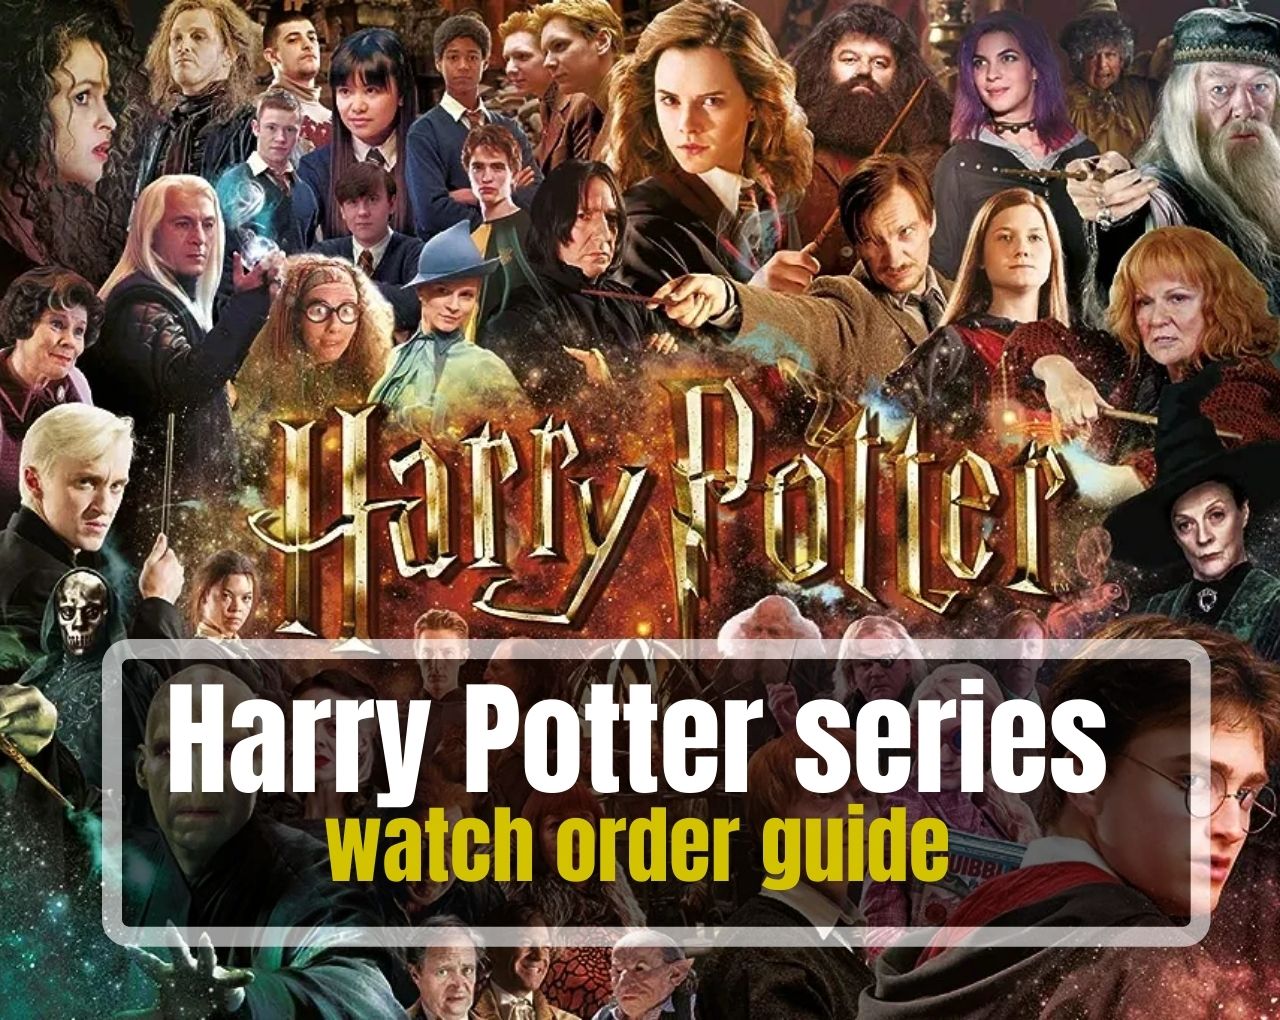 Harry Potter series watch order guide